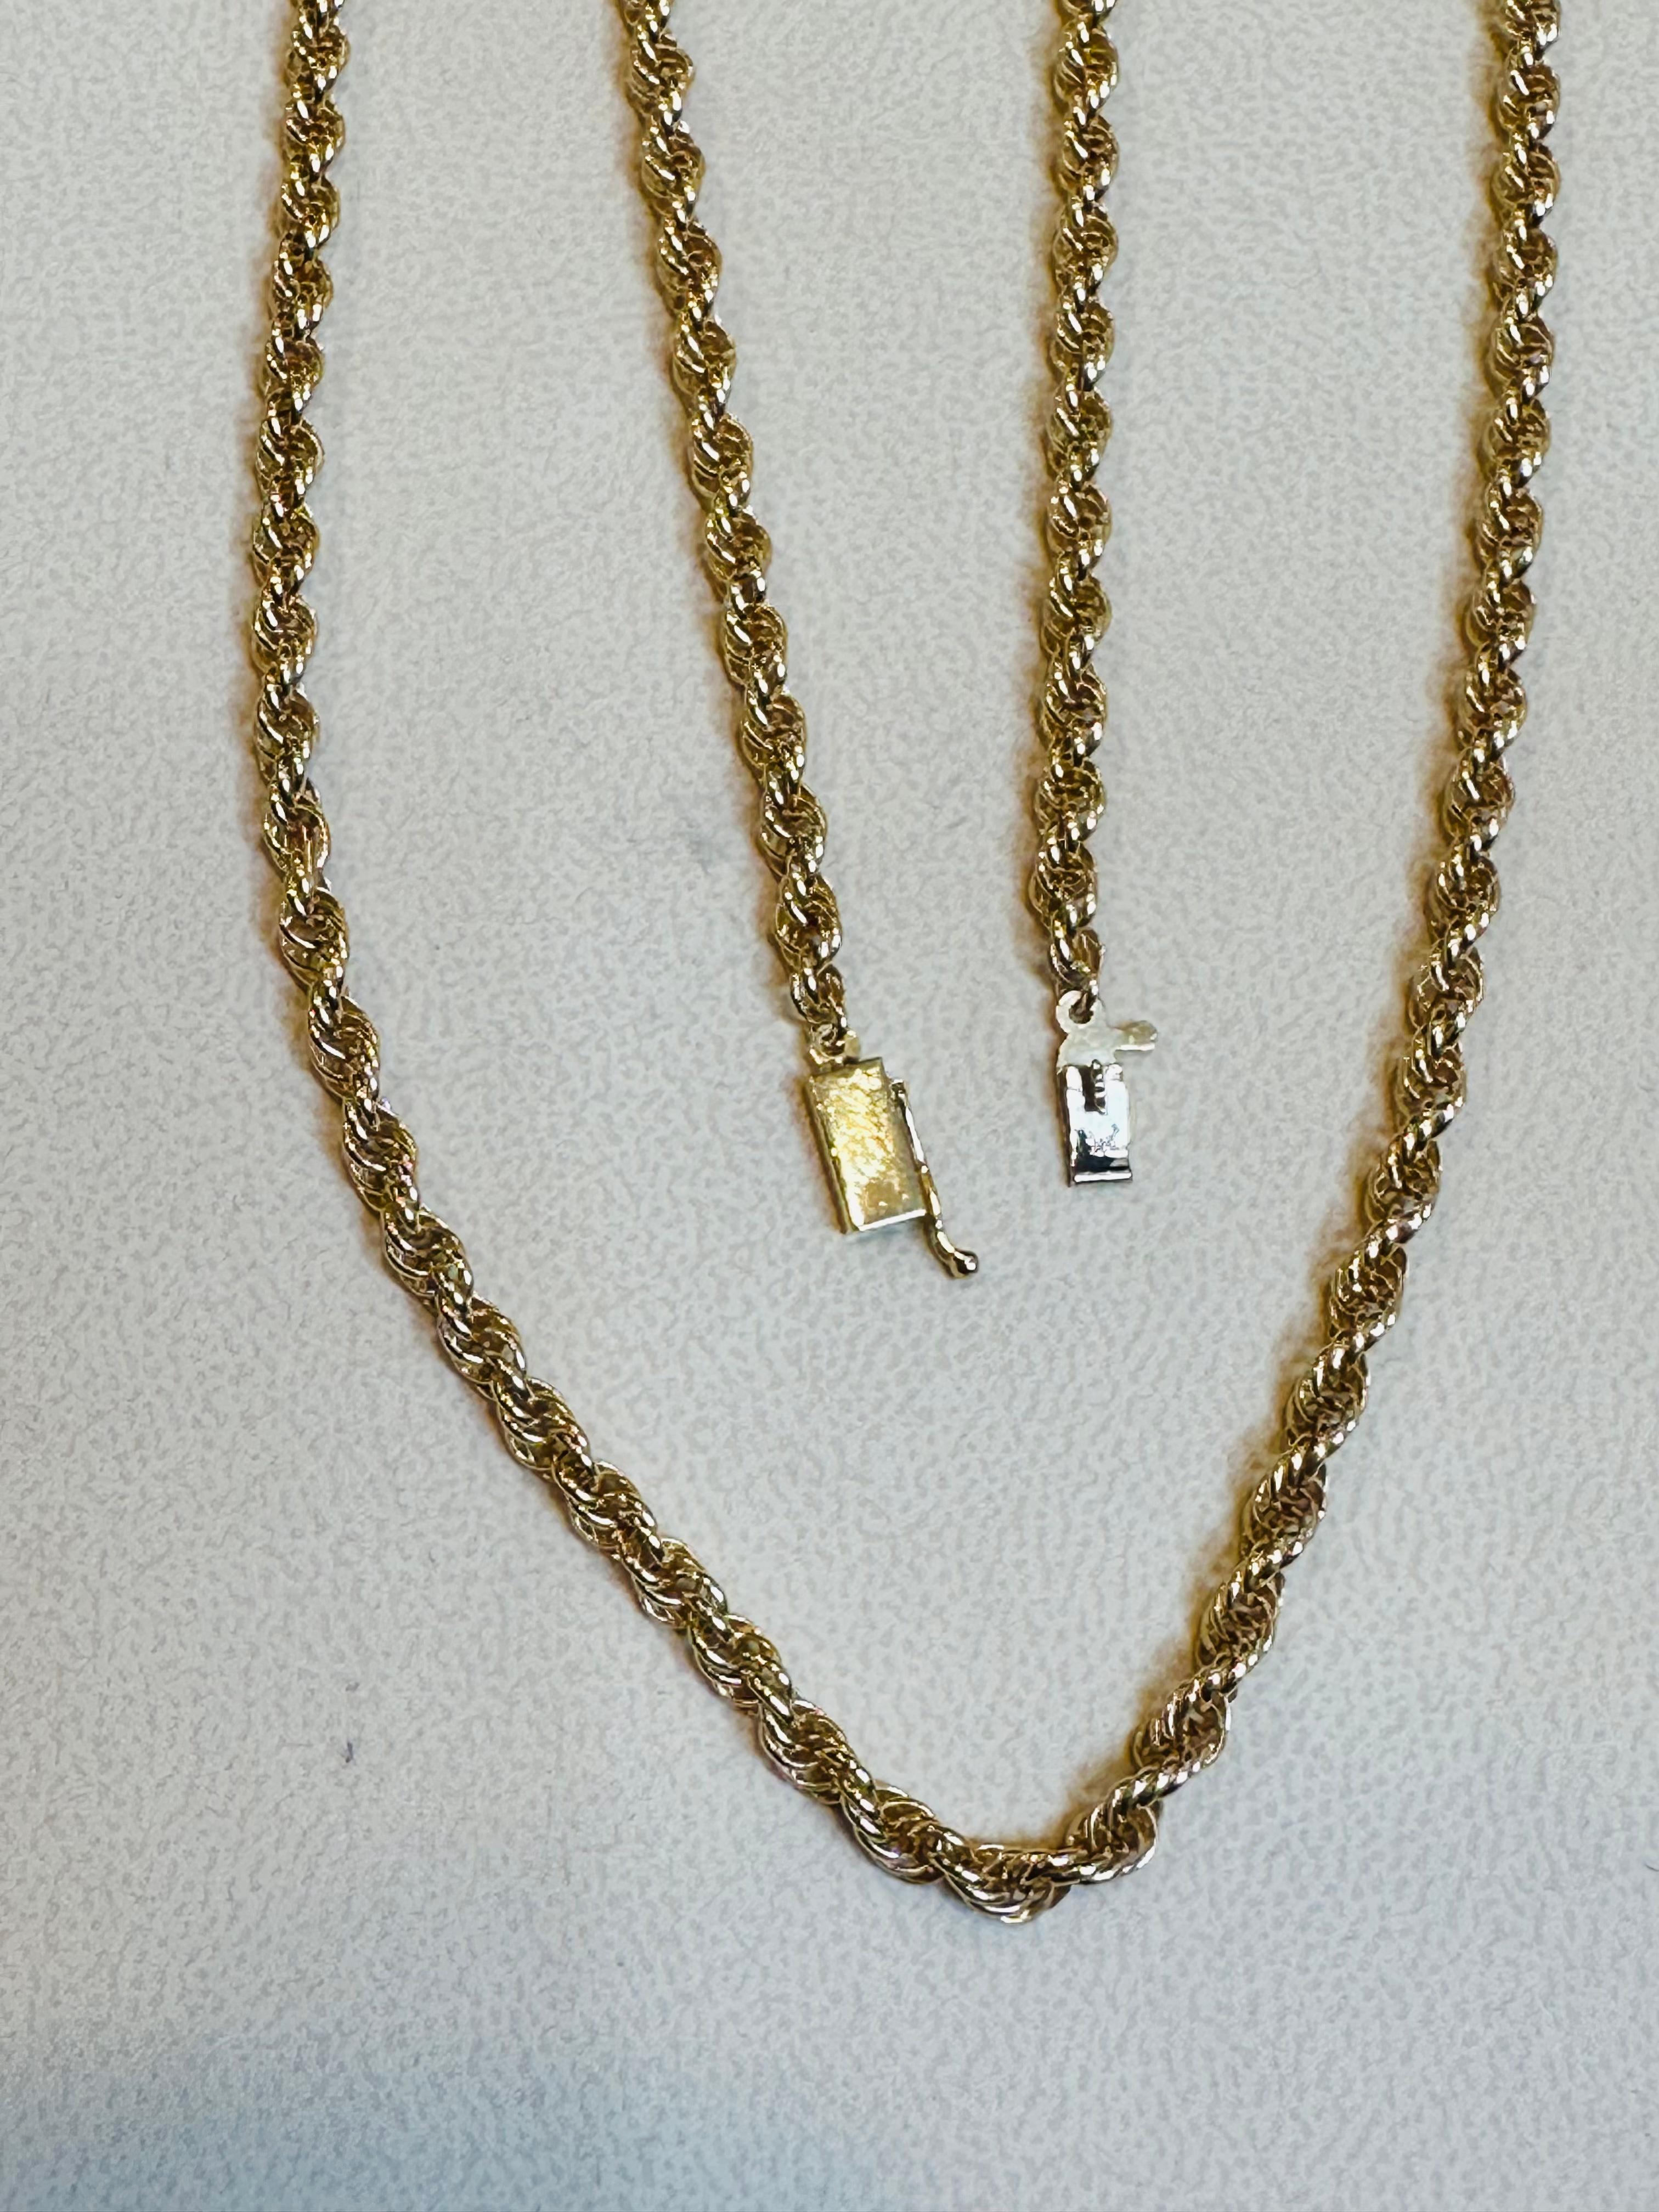 Vintage 14 Karat Yellow Gold 20.5 Gm, Rope Chain Necklace In Excellent Condition For Sale In New York, NY